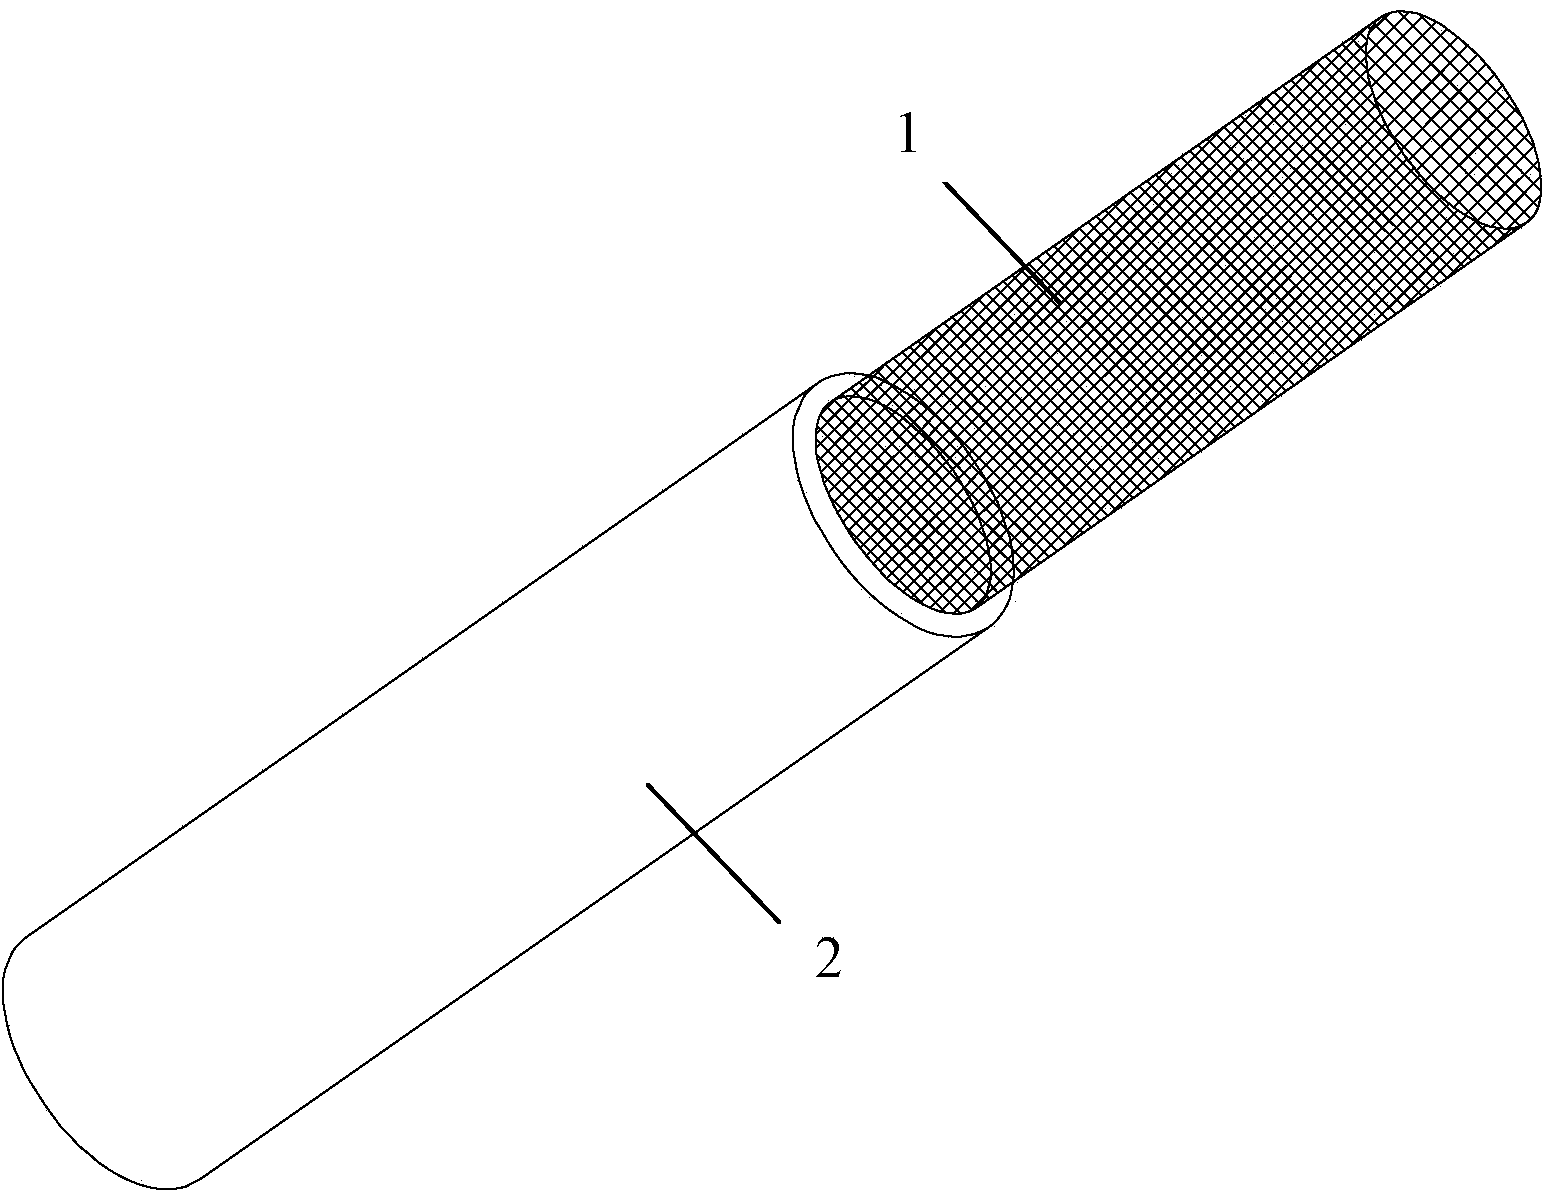 Modified polypropylene composite pipe for protecting high-voltage cables